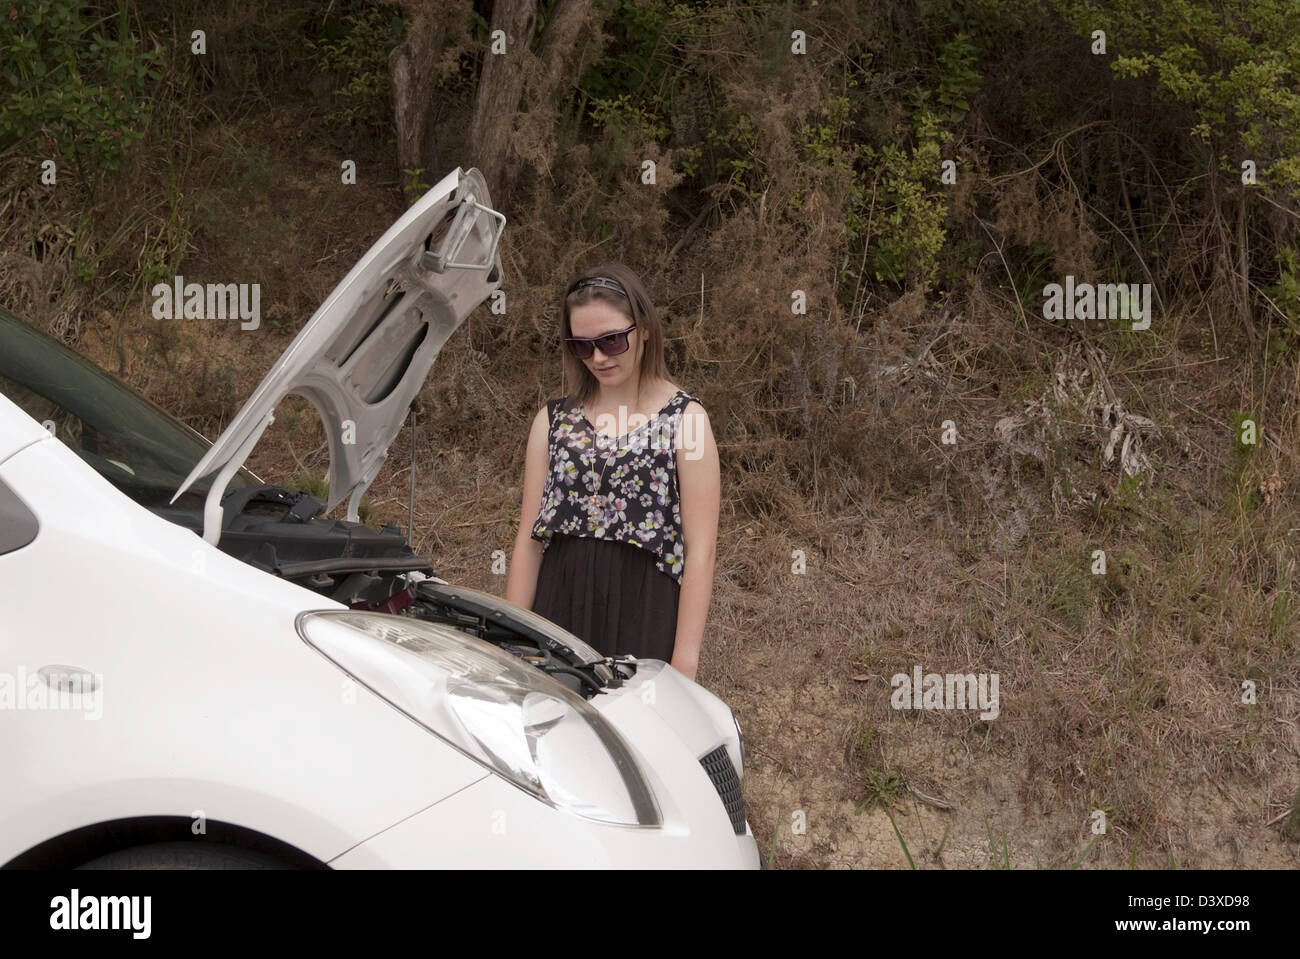 A young woman looks concerned at her car with the bonnet open. Stock Photo